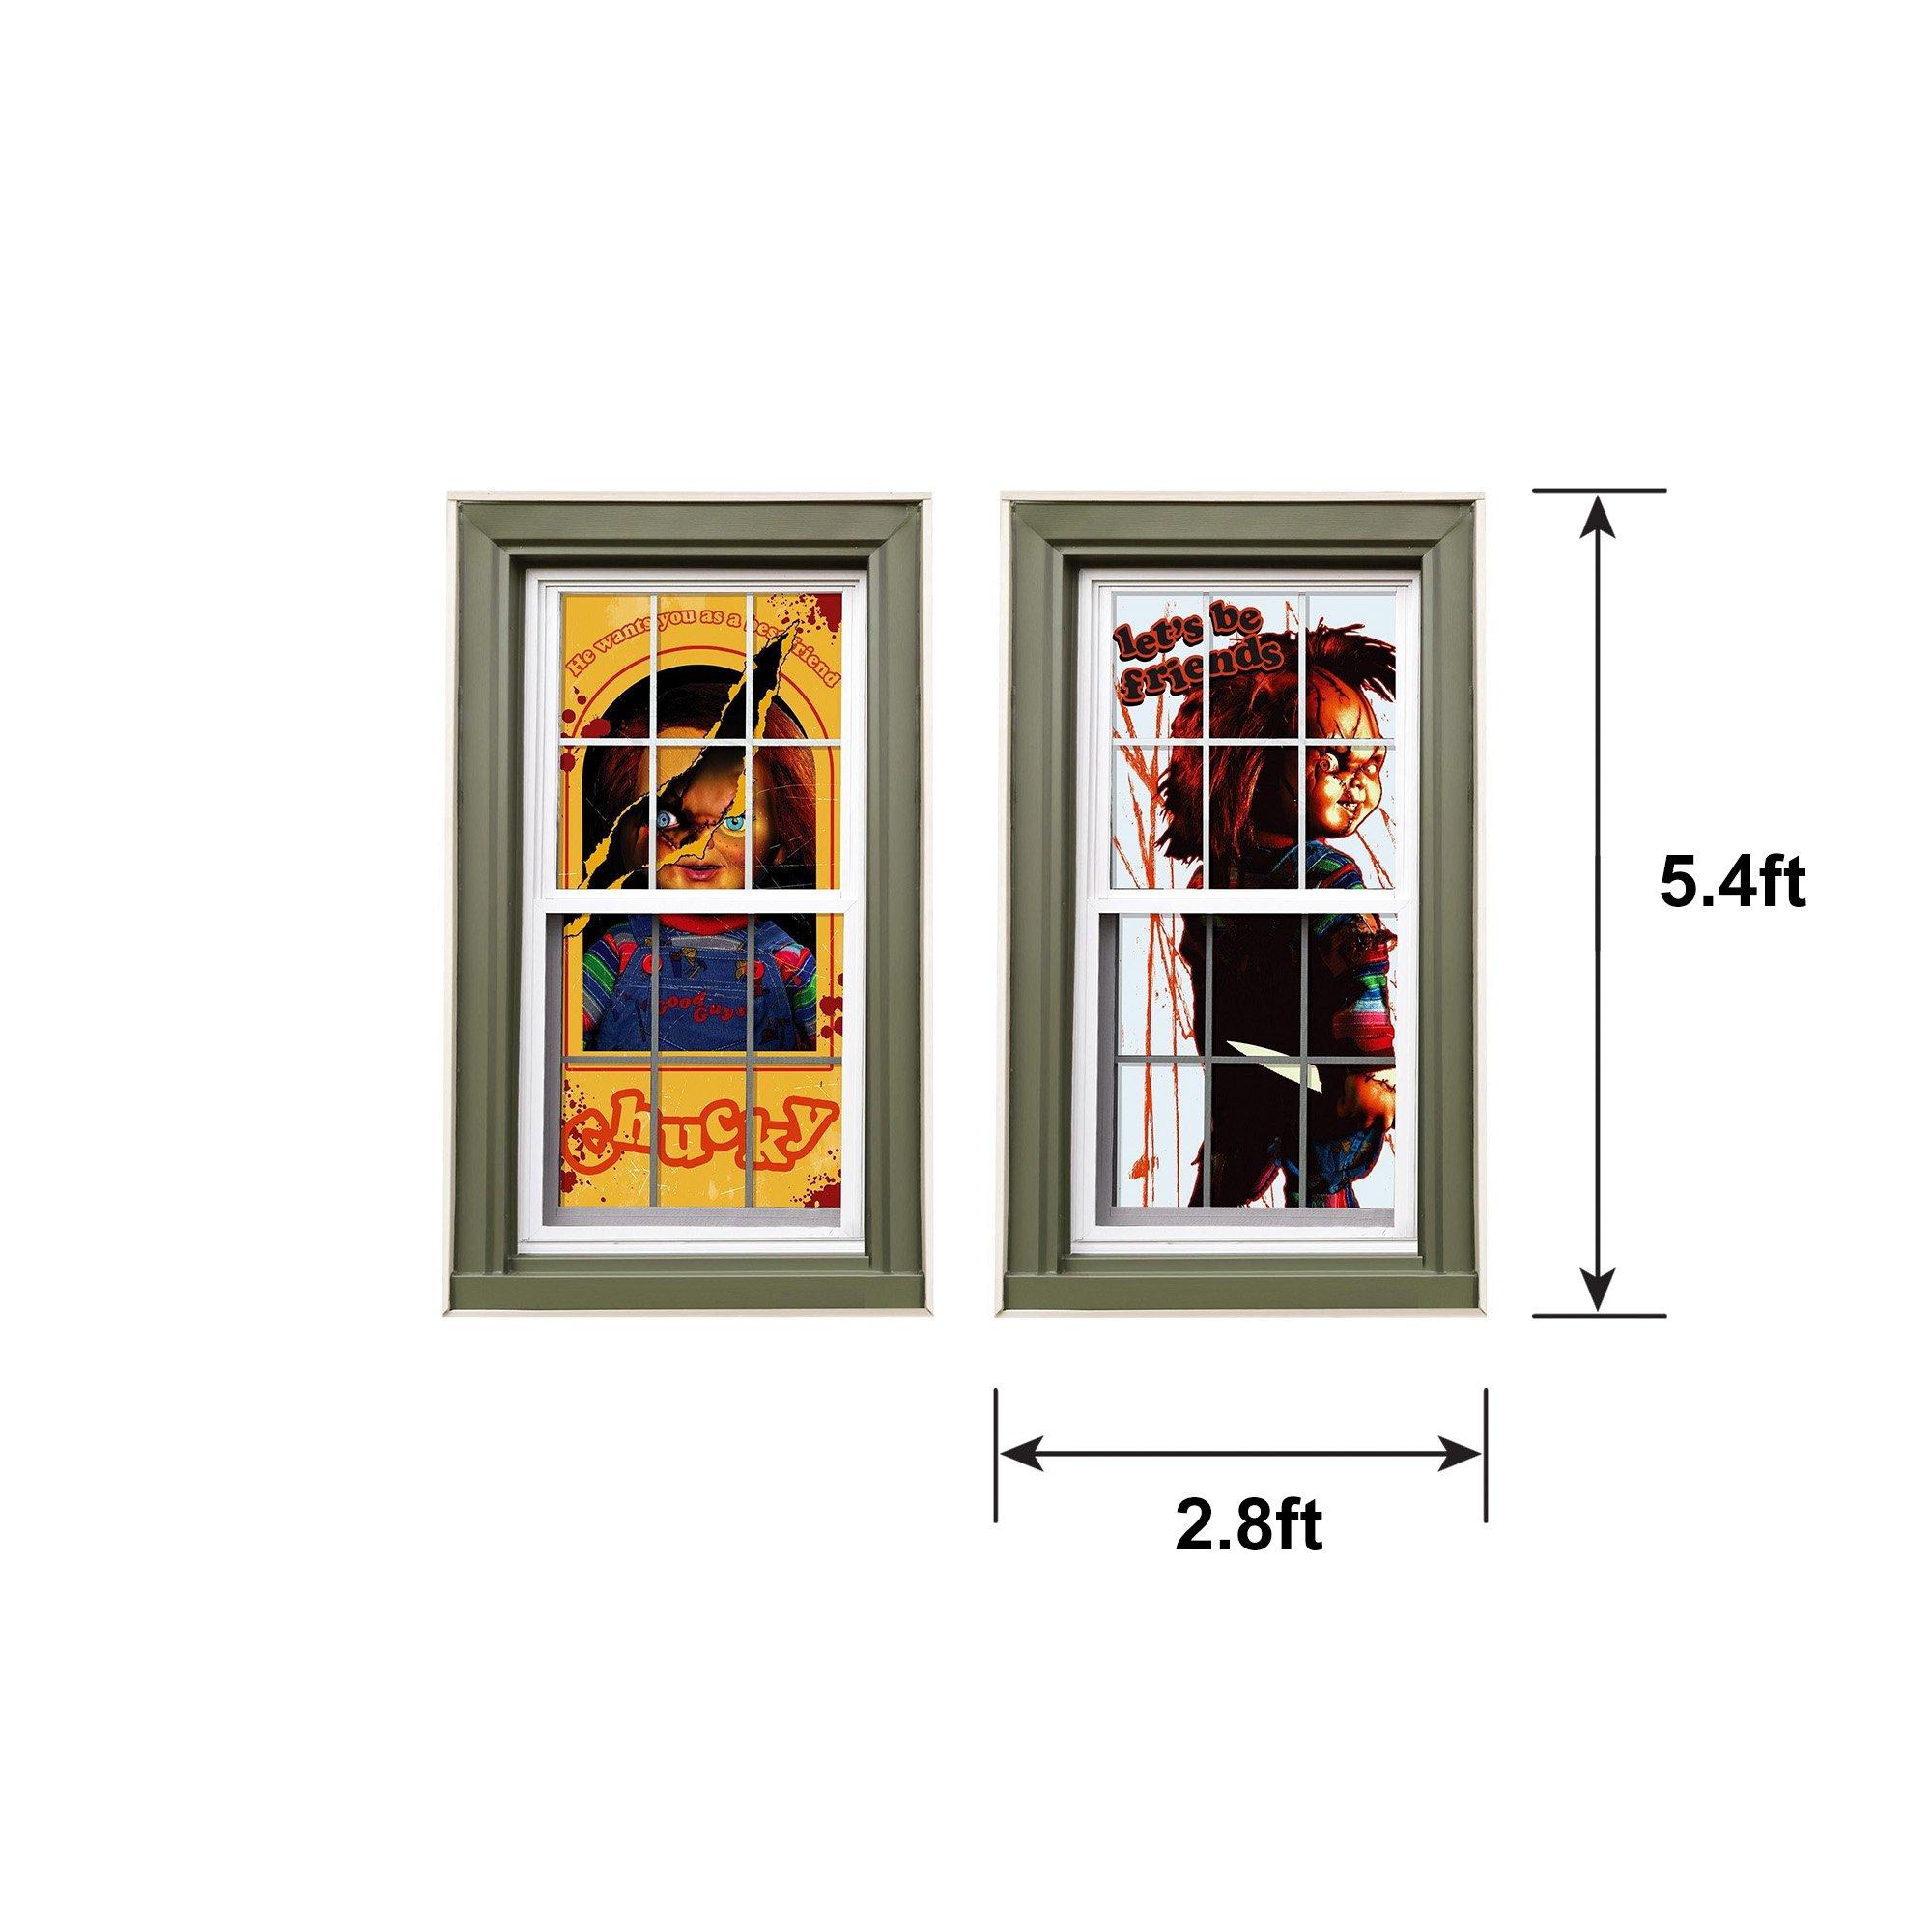 Chucky Plastic Window Silhouette Scene Setters, 2.8ft x 5.4ft, 2ct - Child's Play